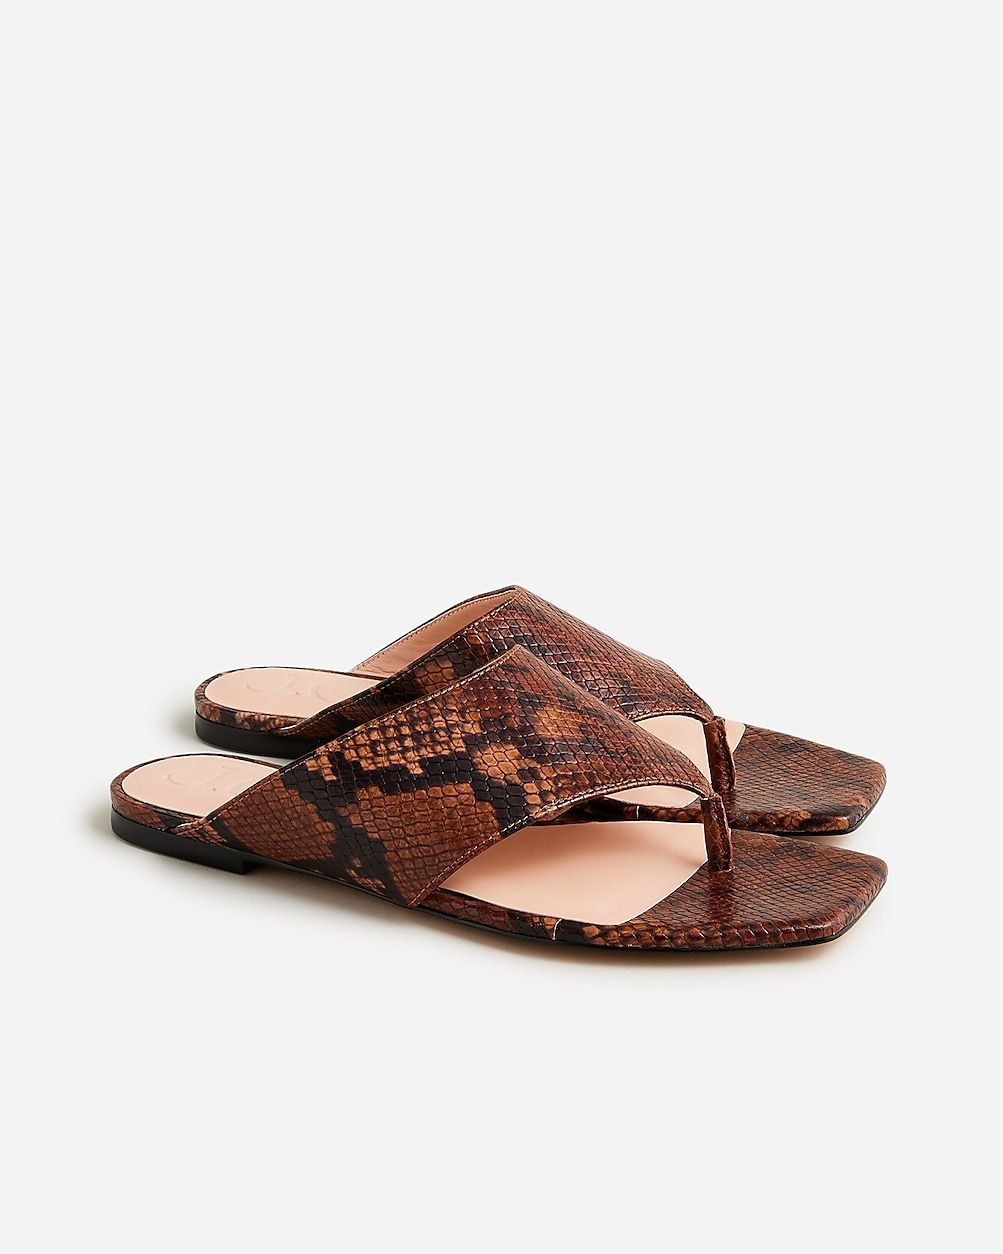 New Capri wide thong sandals in snake-embossed leather | J.Crew US